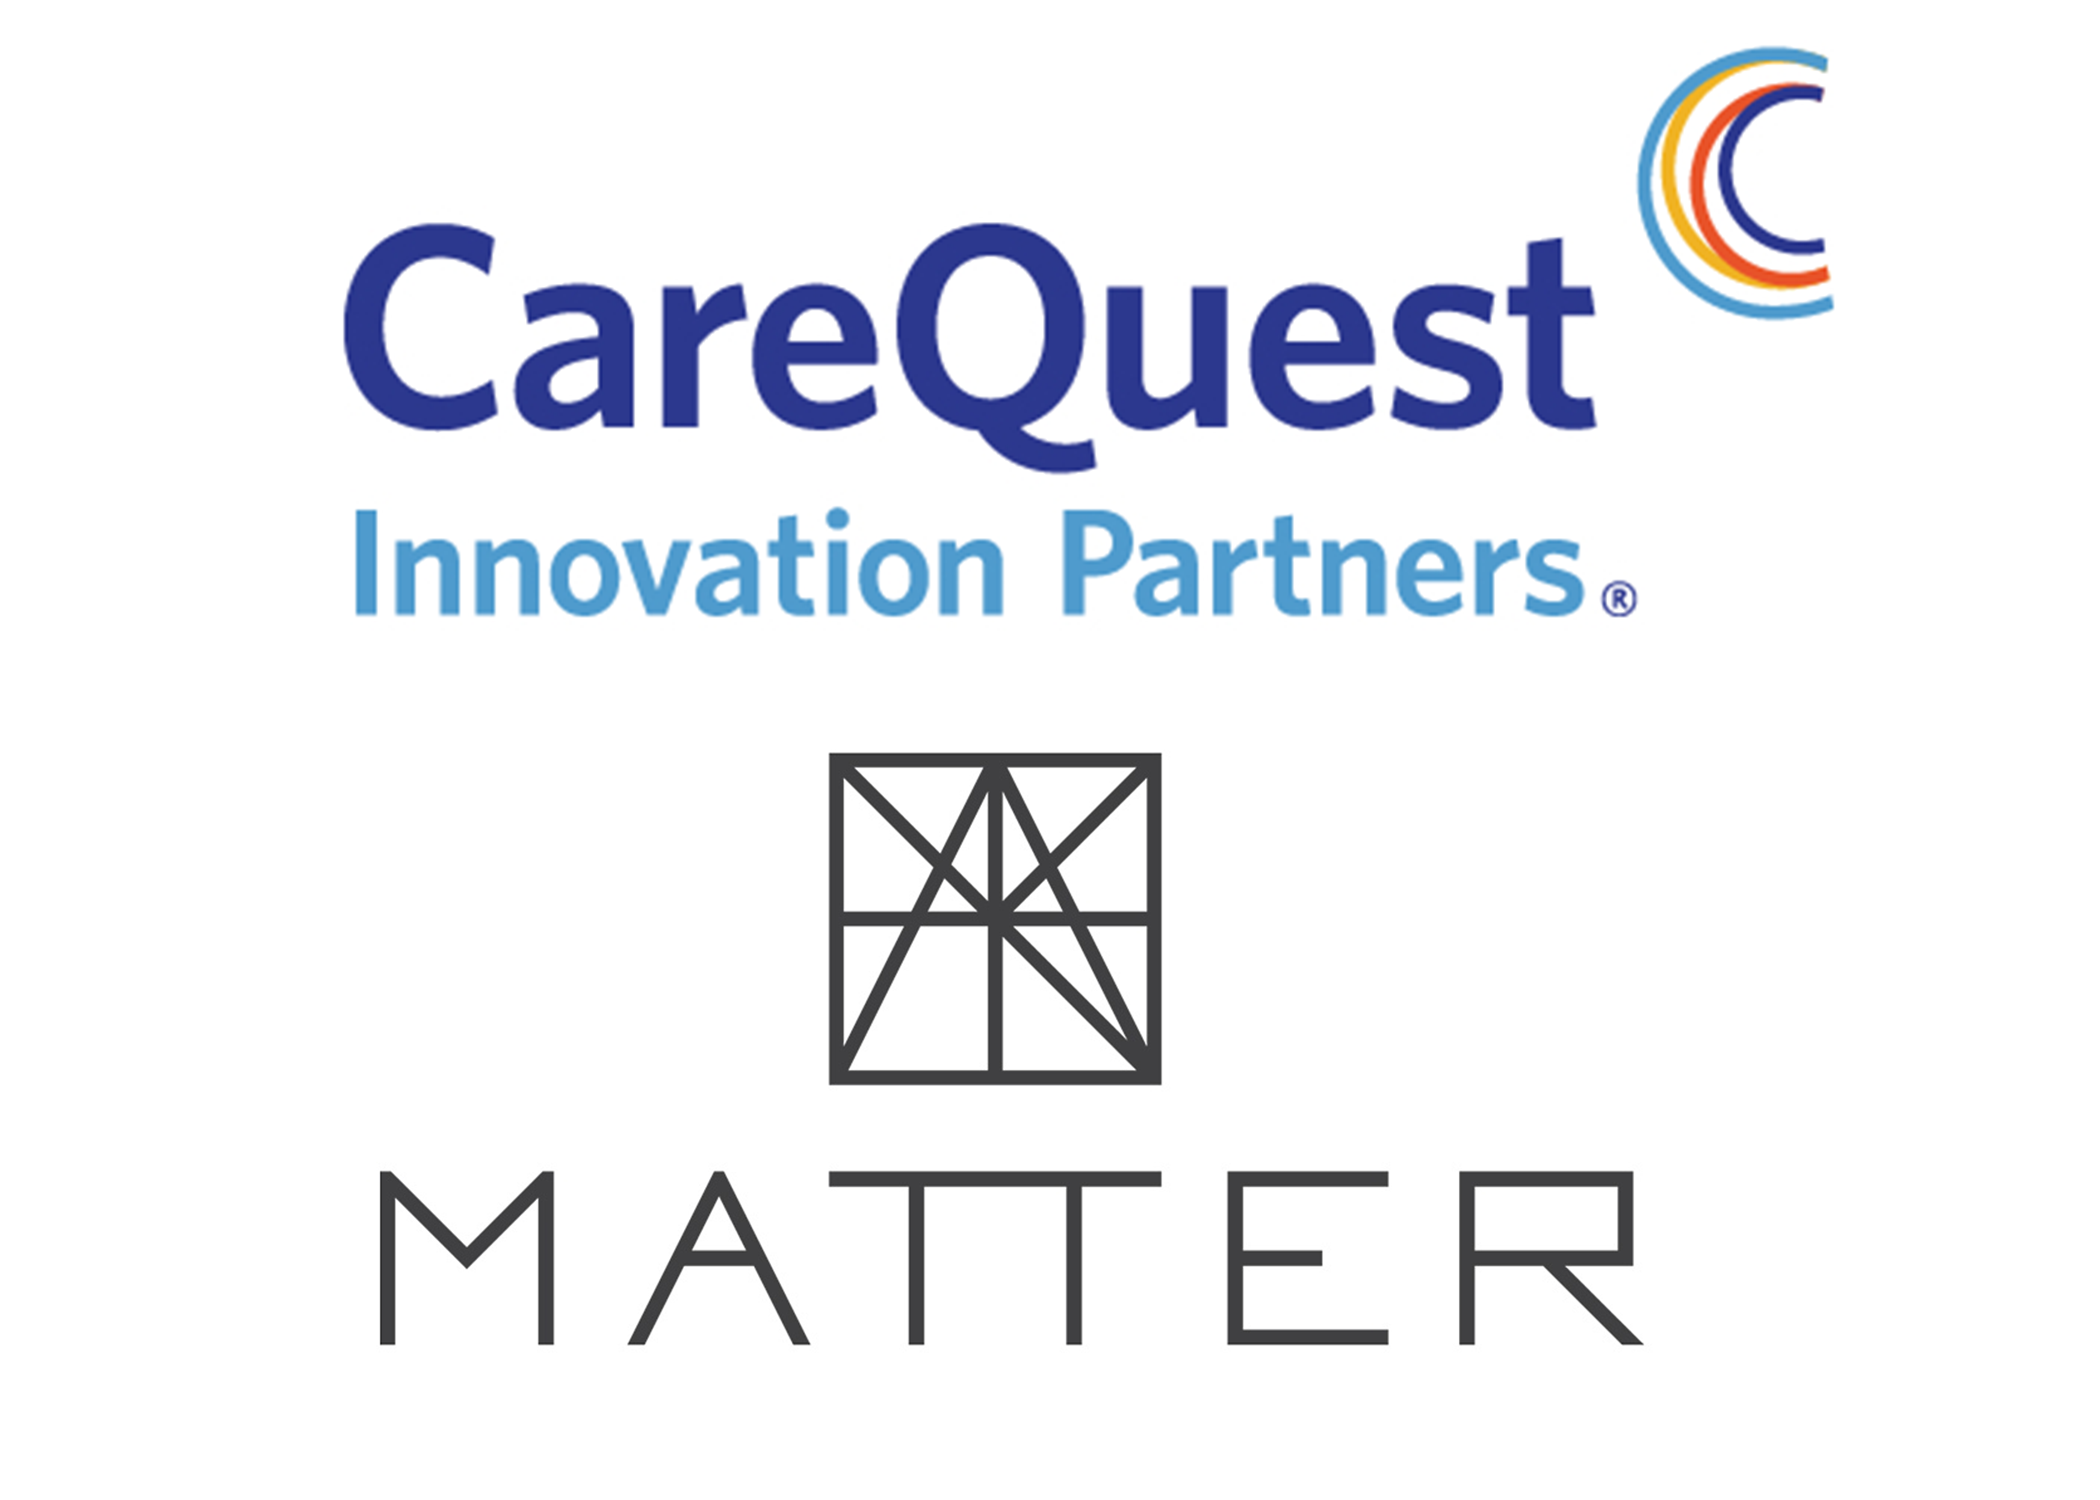 CareQuest Innovation Partners and MATTER Launch Third Annual SMILE Health Accelerator Program. Image credit: © Carestream Dental © MATTER